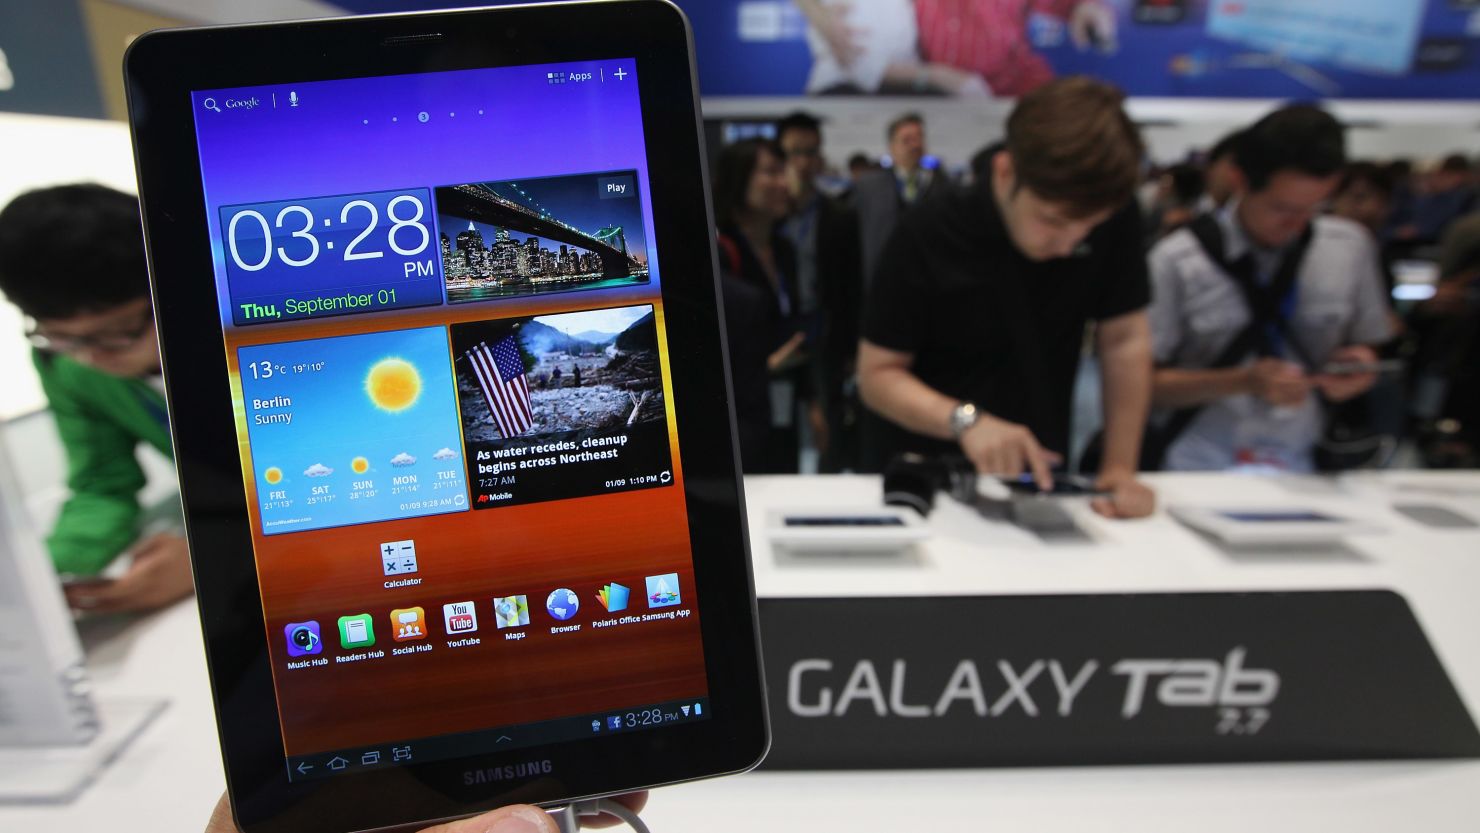 A Samsung Galaxy Tab 7.7 tablet on display at a trade fair in Germany. 